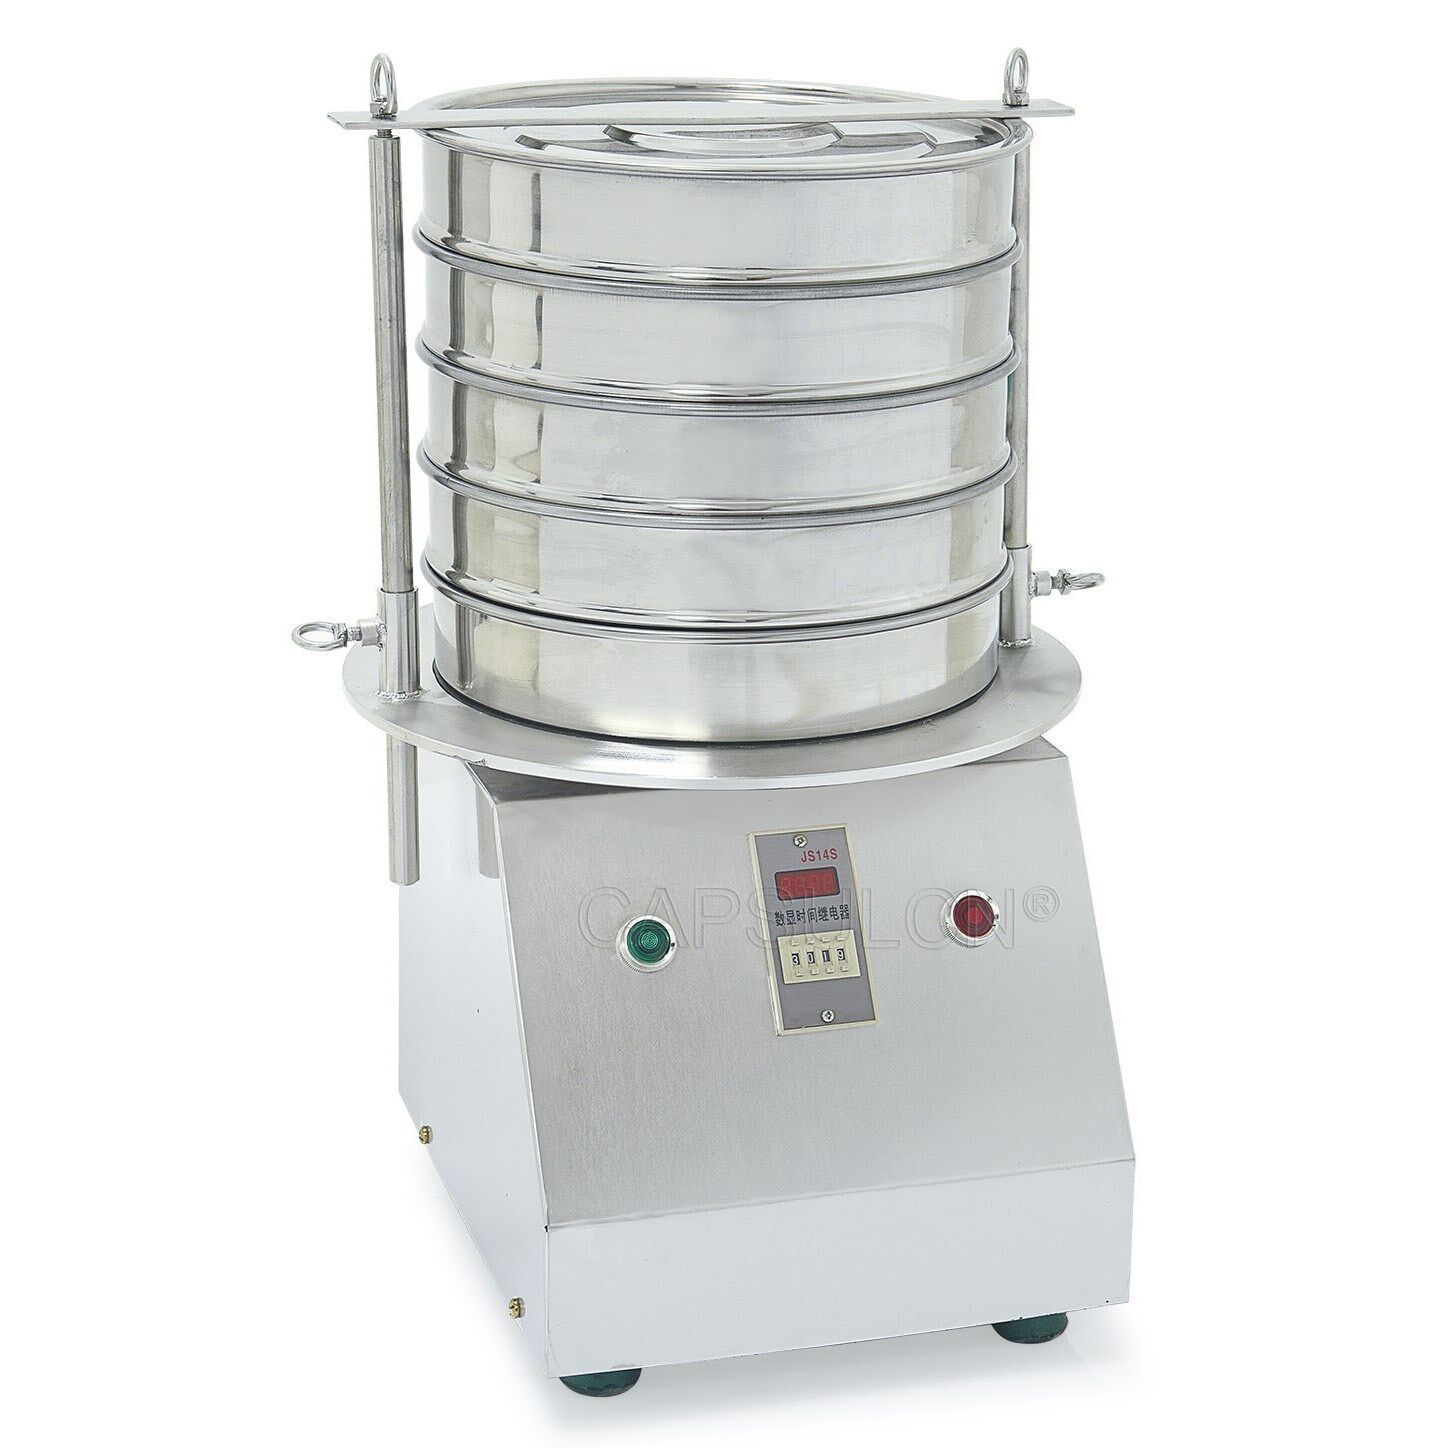 https://cdn.capsulcn.com/content/images/thumbs/0004763_powder-sifter-machine-sy-300.jpeg?image_process=resize,l_960